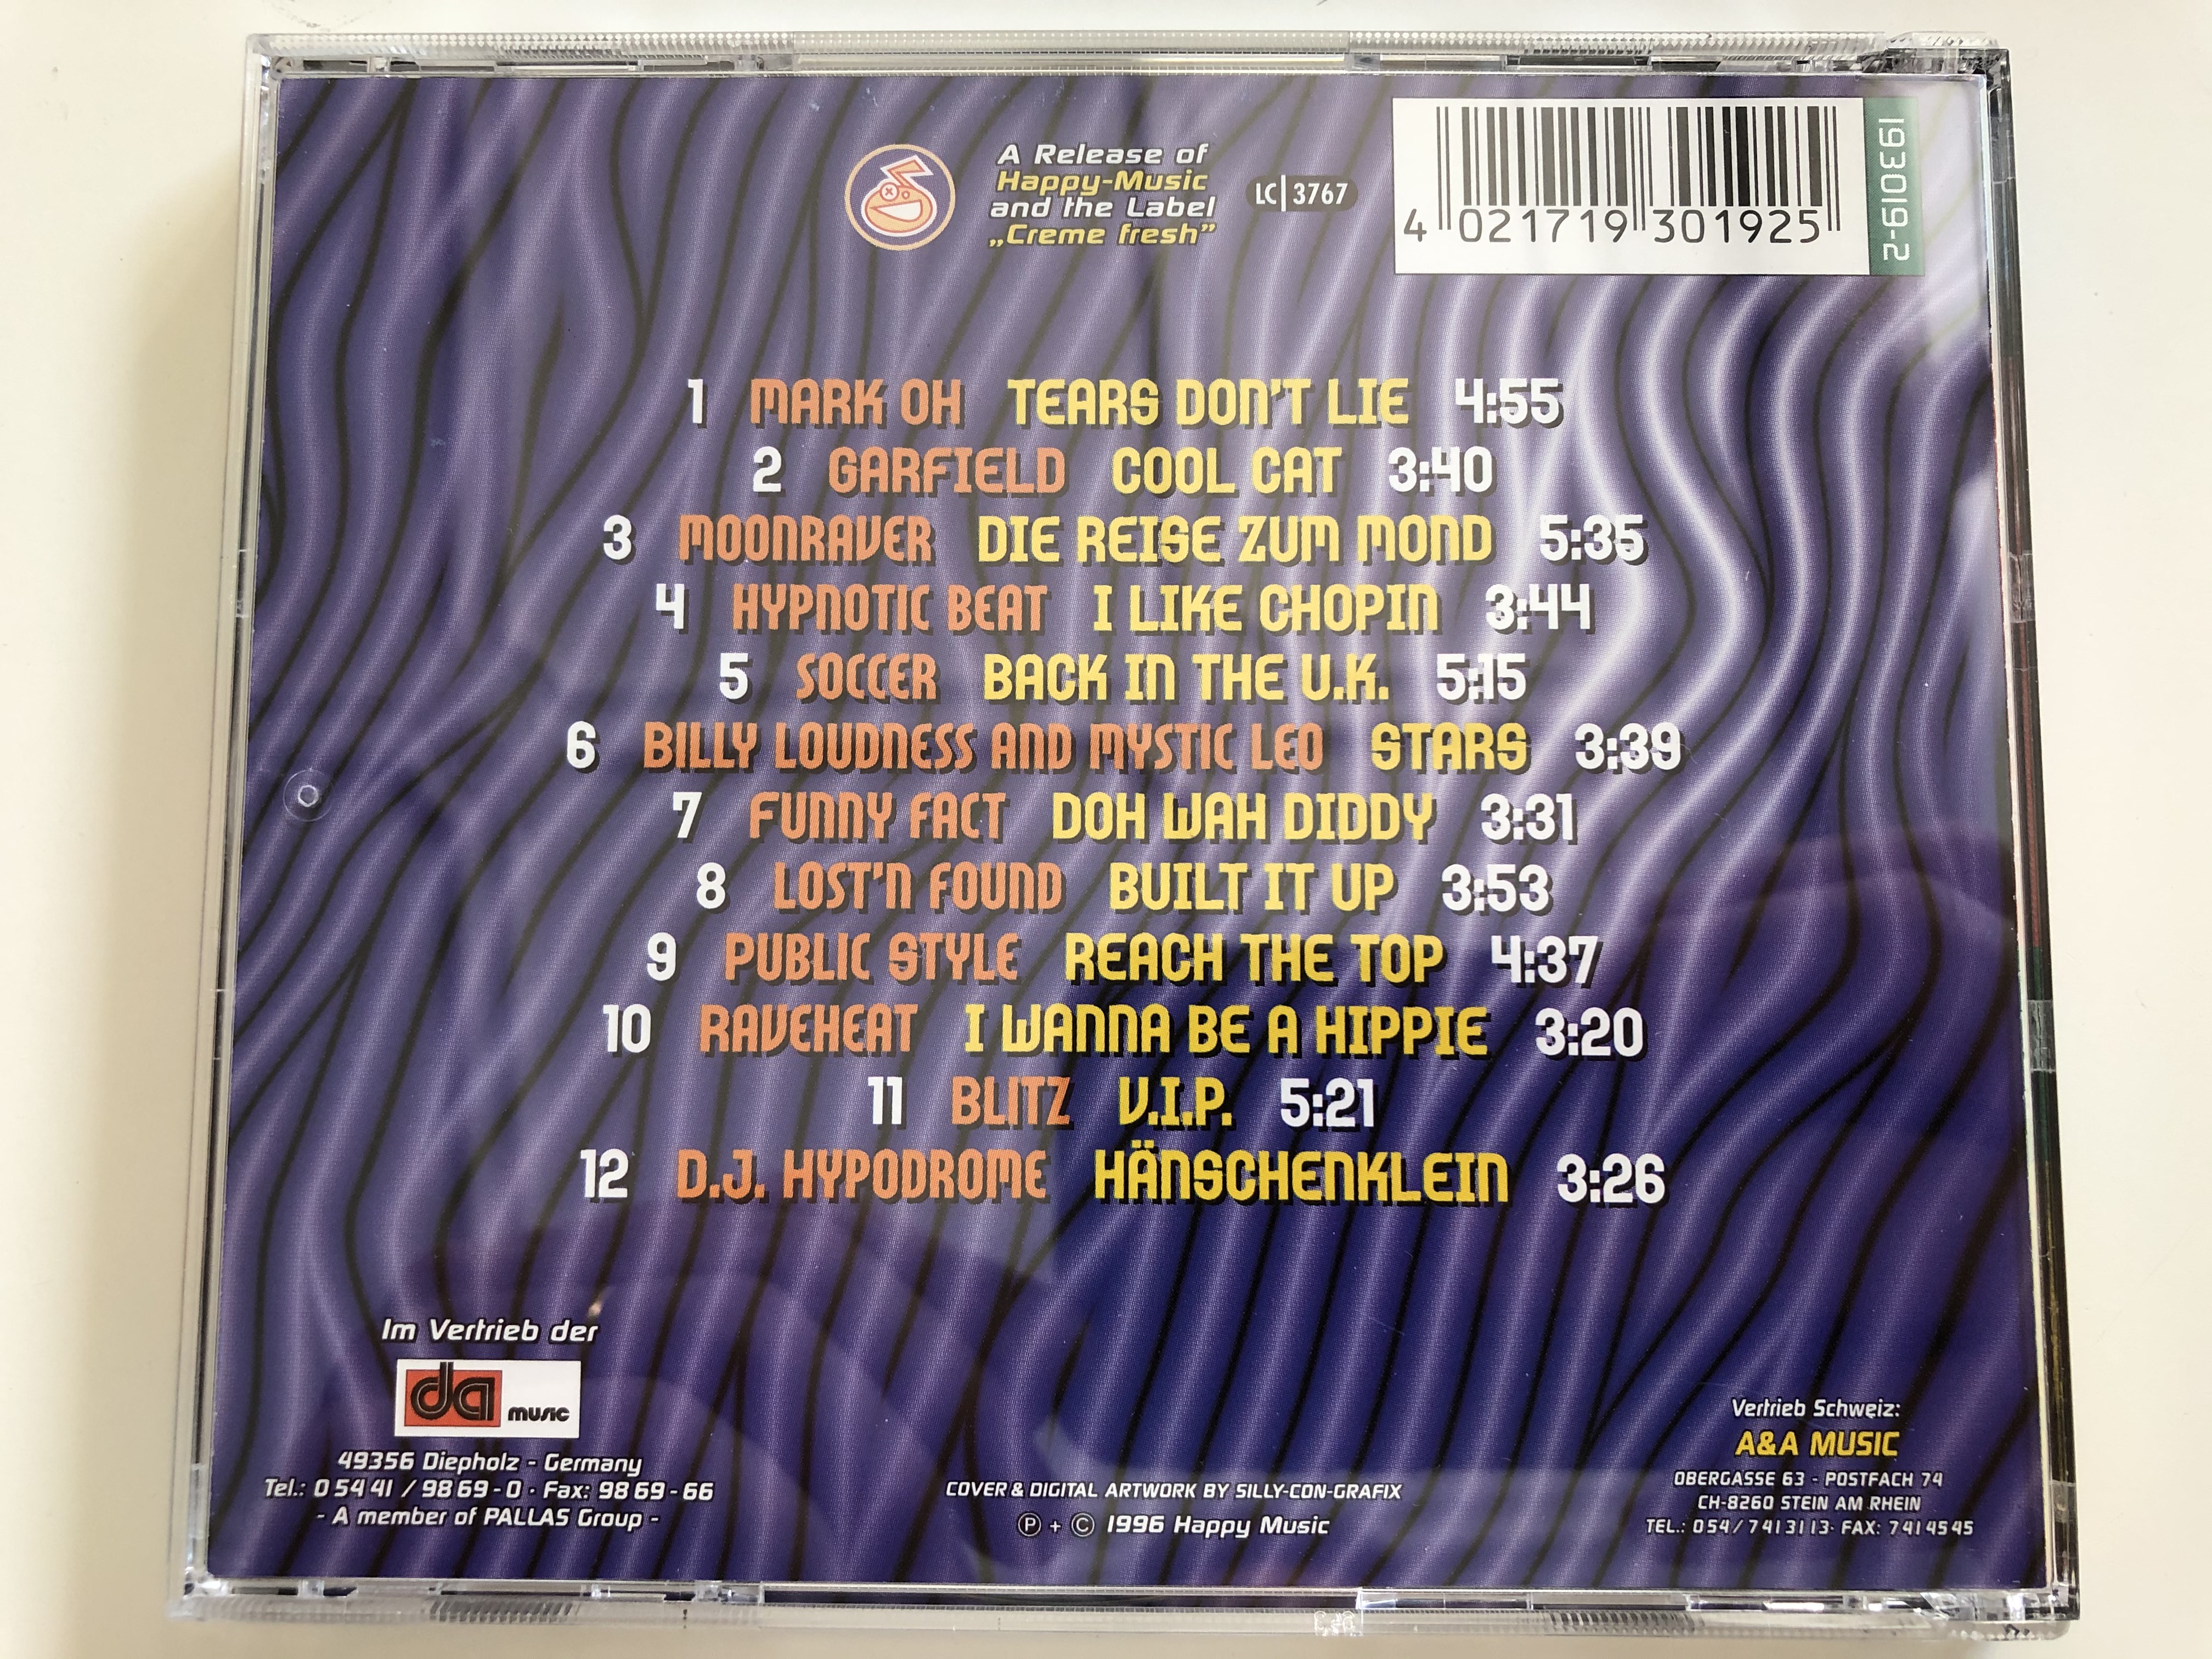 coole-tekkno-hits-1-mark-on-garfield-moonraver-hypnotic-beat-v.v.a-stars-cool-cat-doh-wah-diddy-tears-don-t-lie-back-in-the-u.k.-happy-music-audio-cd-1996-193019-2-5-.jpg